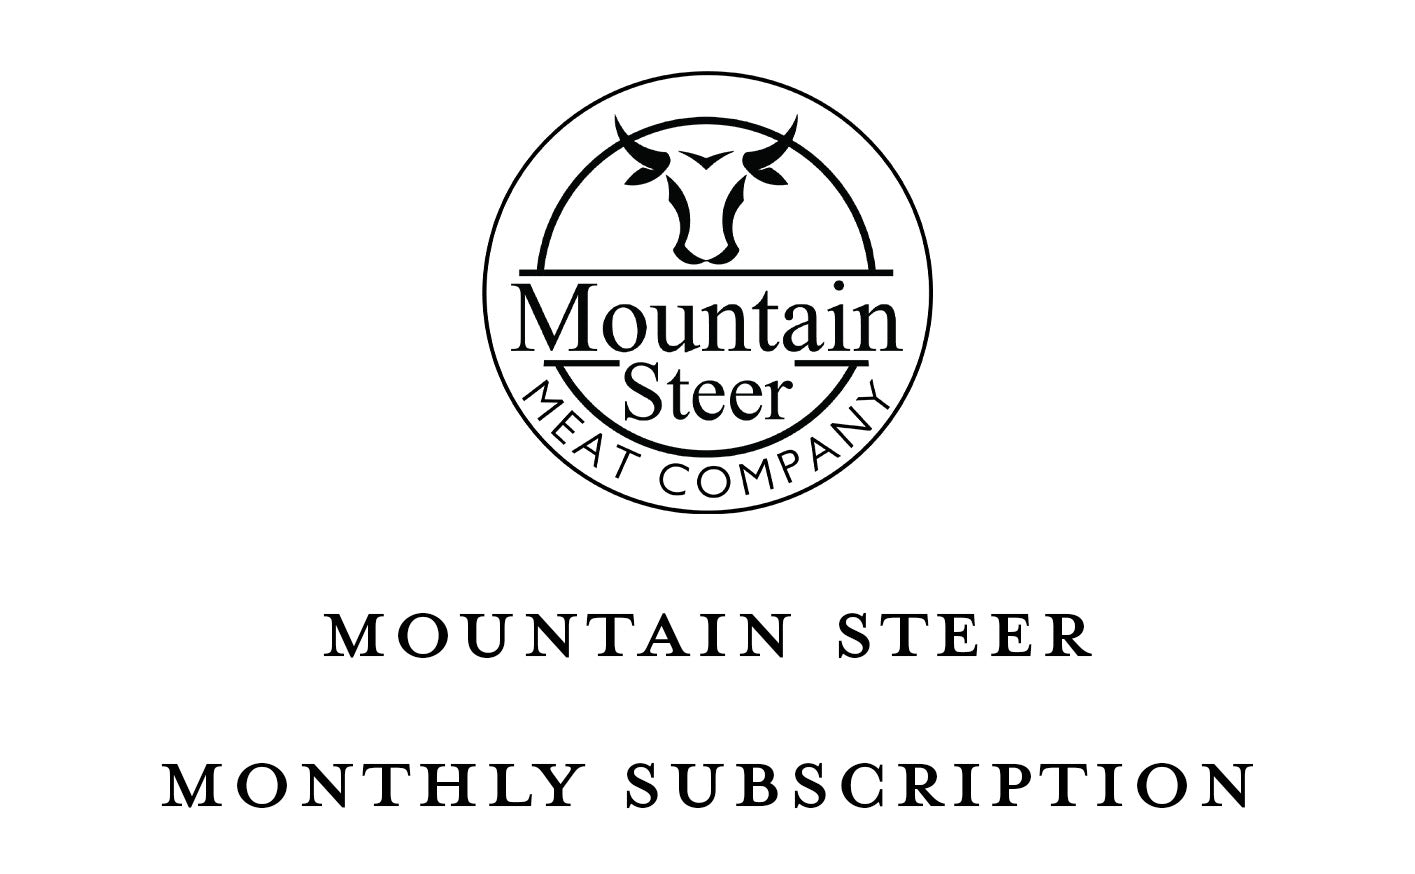 Mountain Steer Monthly Subscription